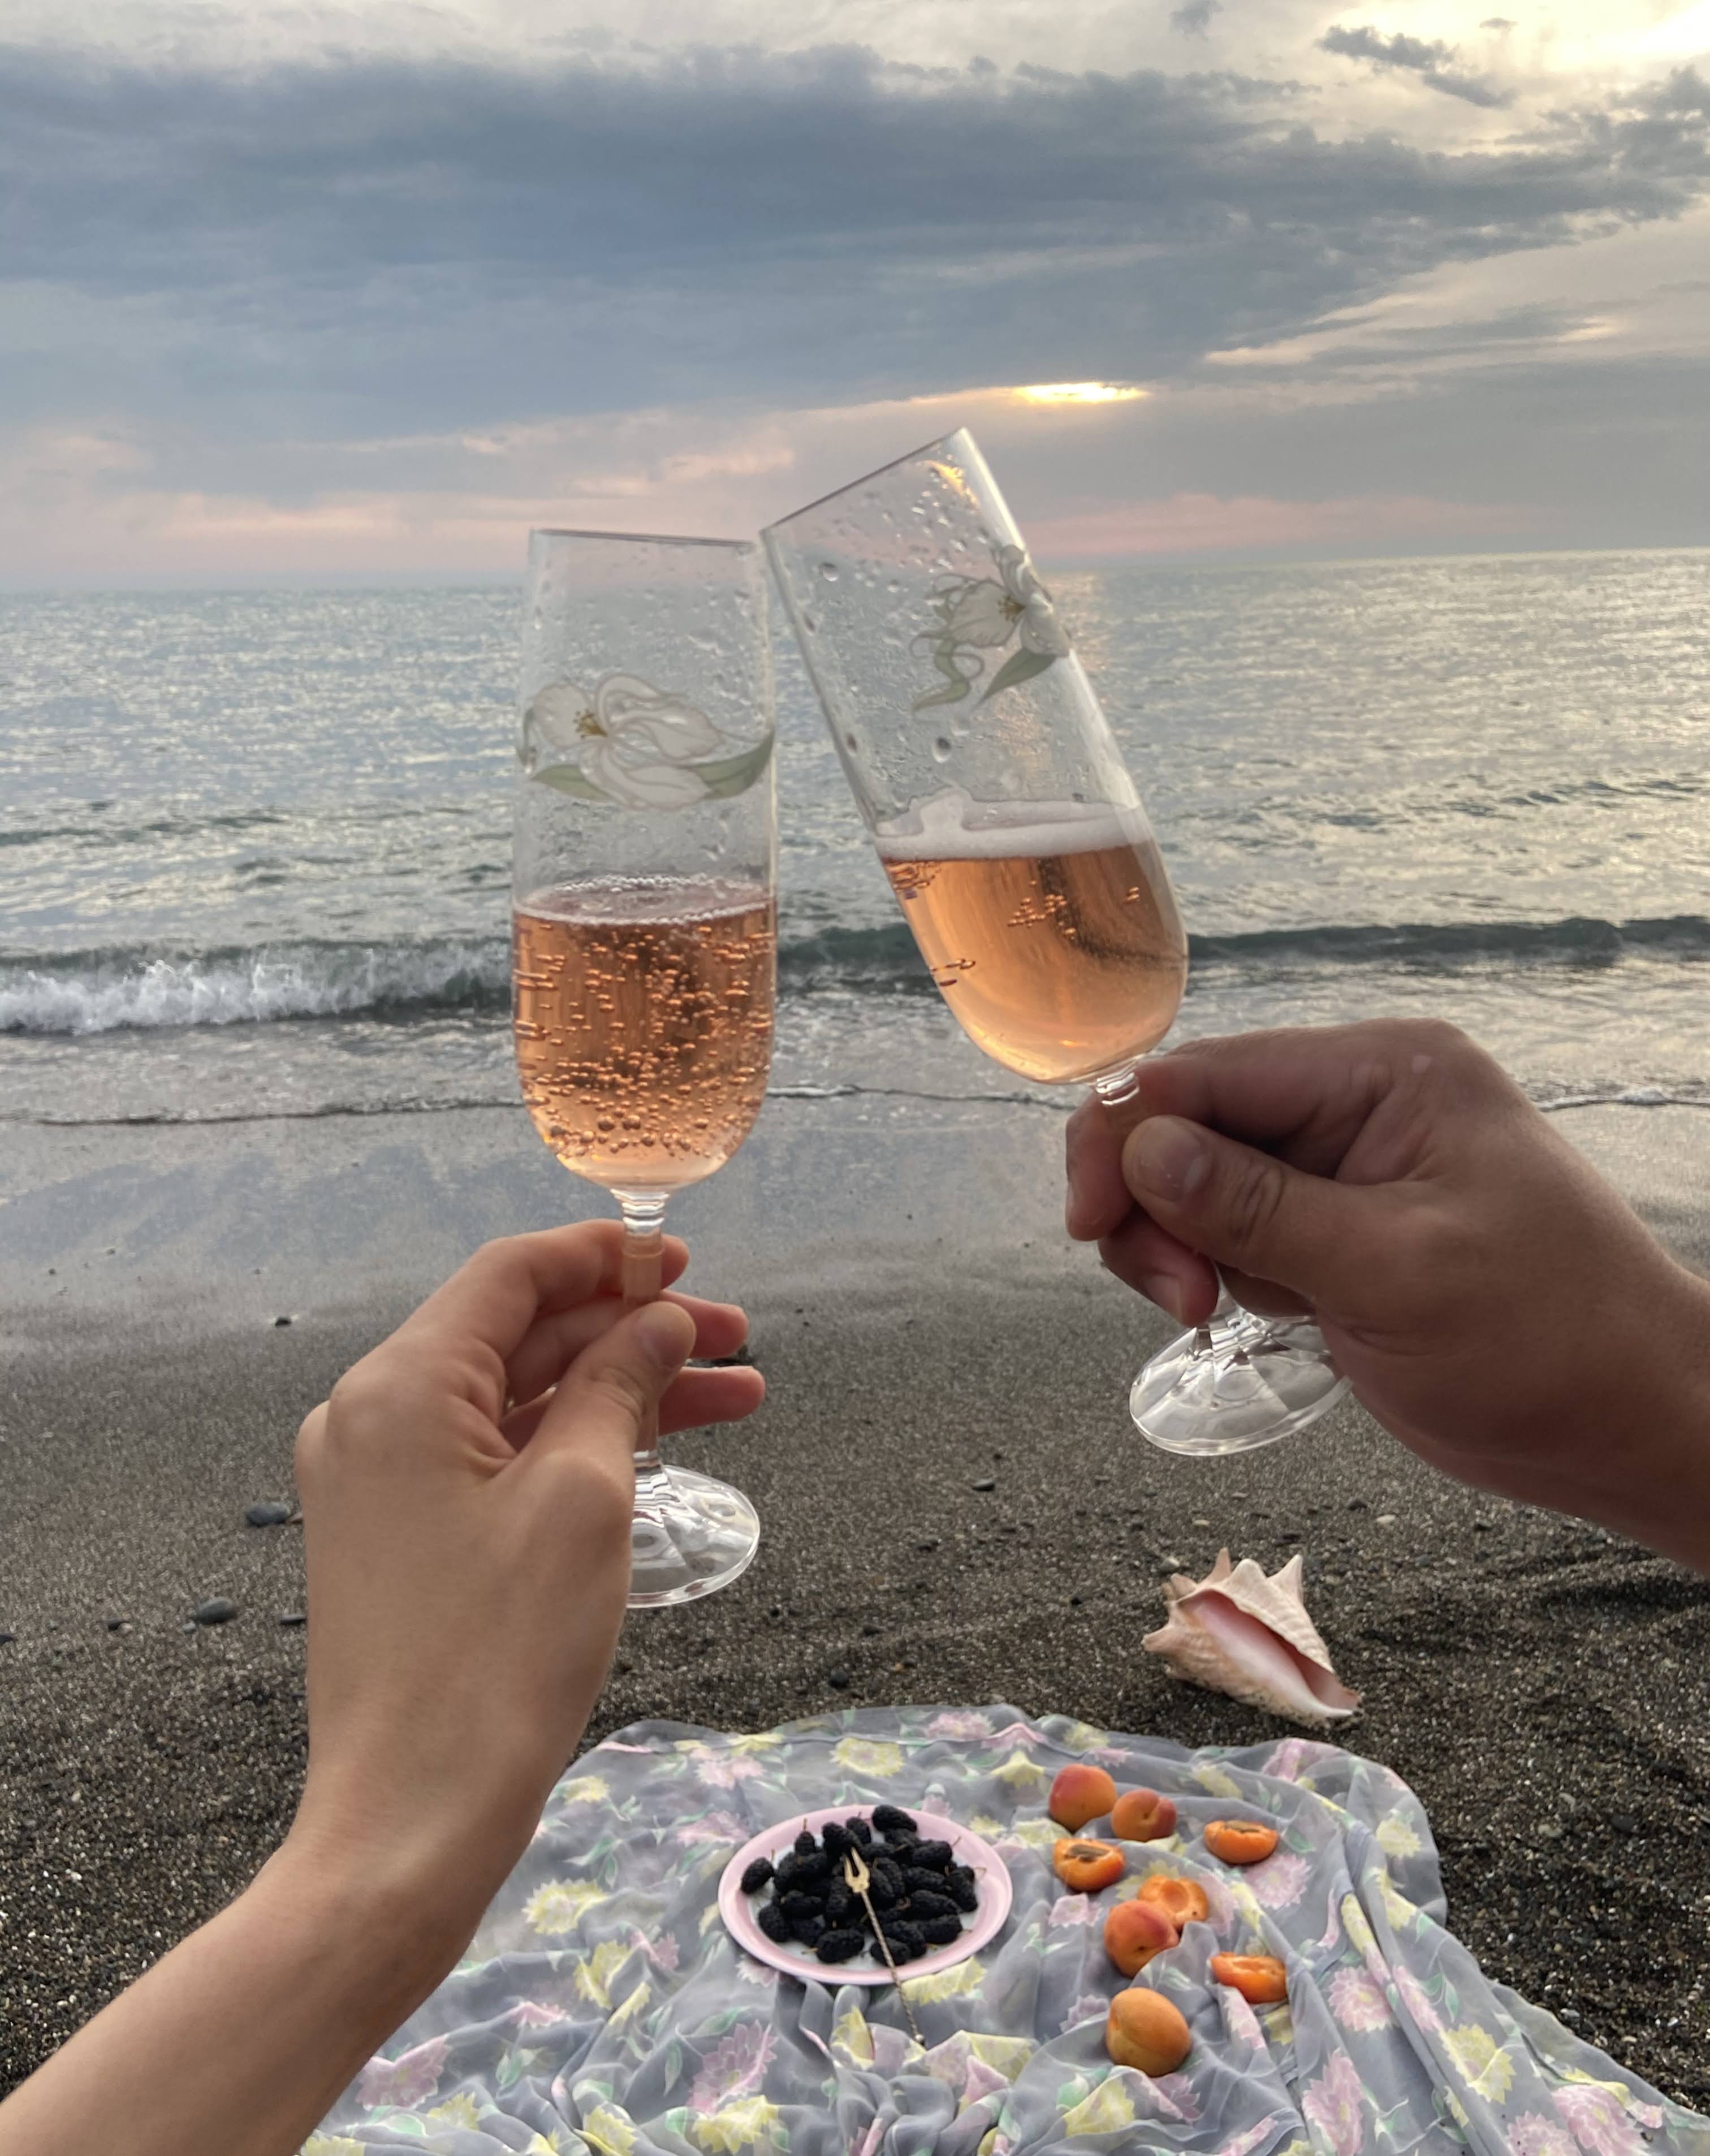 Two people toasting each other with wine glasses - Champagne